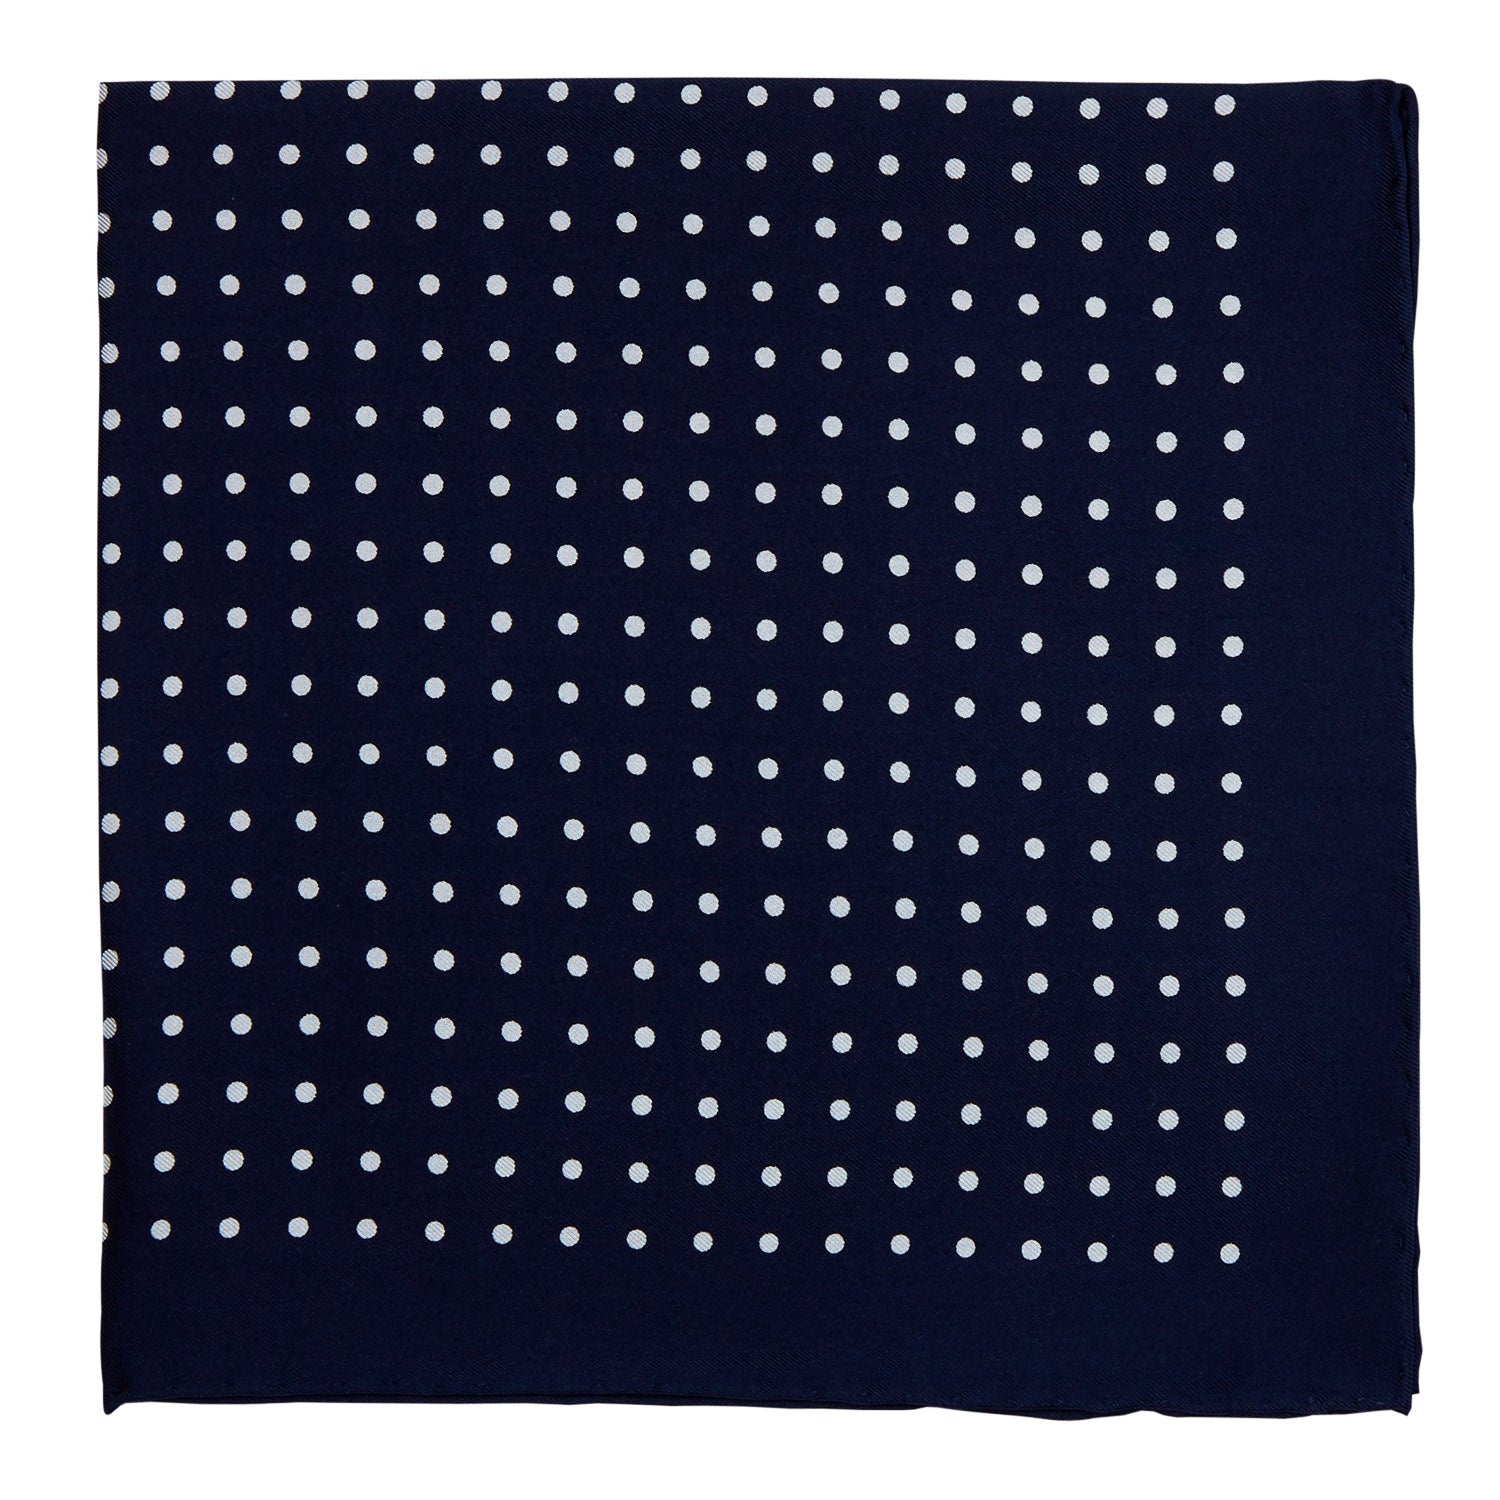 A Sovereign Grade 100% Silk Navy London Dot Pocket Square from KirbyAllison.com to complete your outfit with formality.